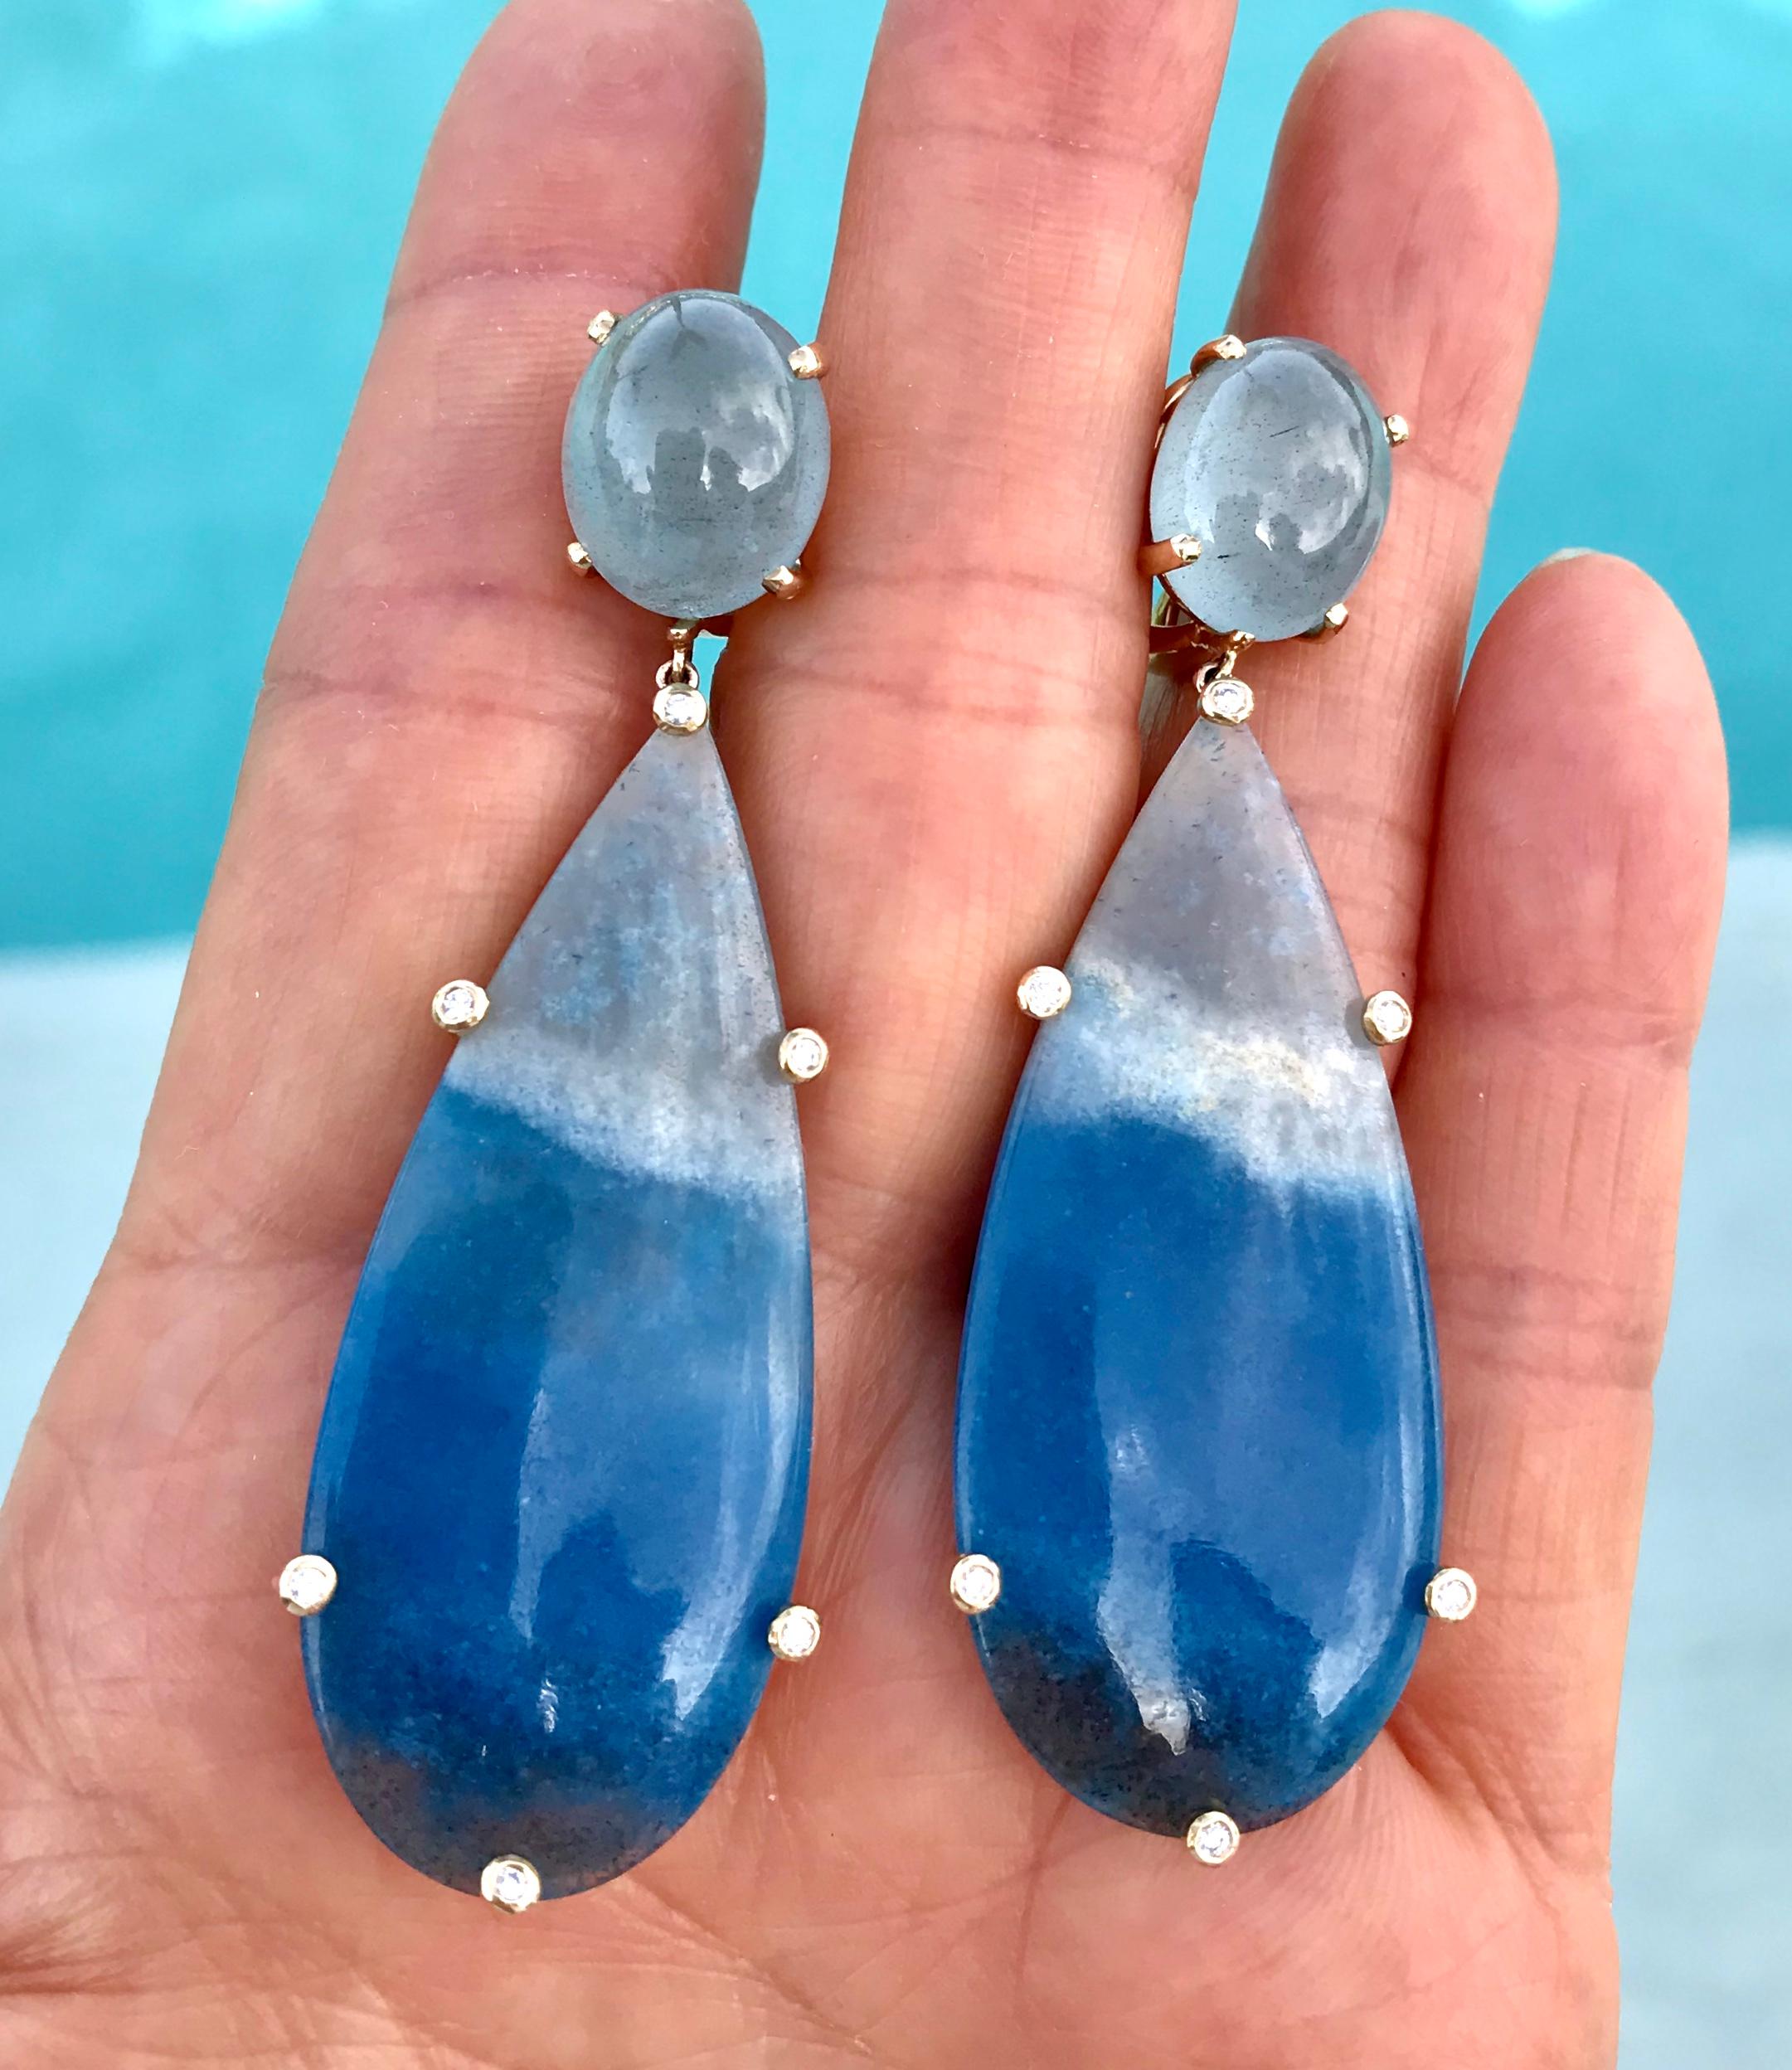 One-of-a-kind cabochon aquamarine, quartz and diamond dangle earrings, handcrafted in 18 karat yellow gold.

These vibrant earrings, in pretty shades of blue and grey, evoke the beautiful seas and waves. They are a major statement piece for your